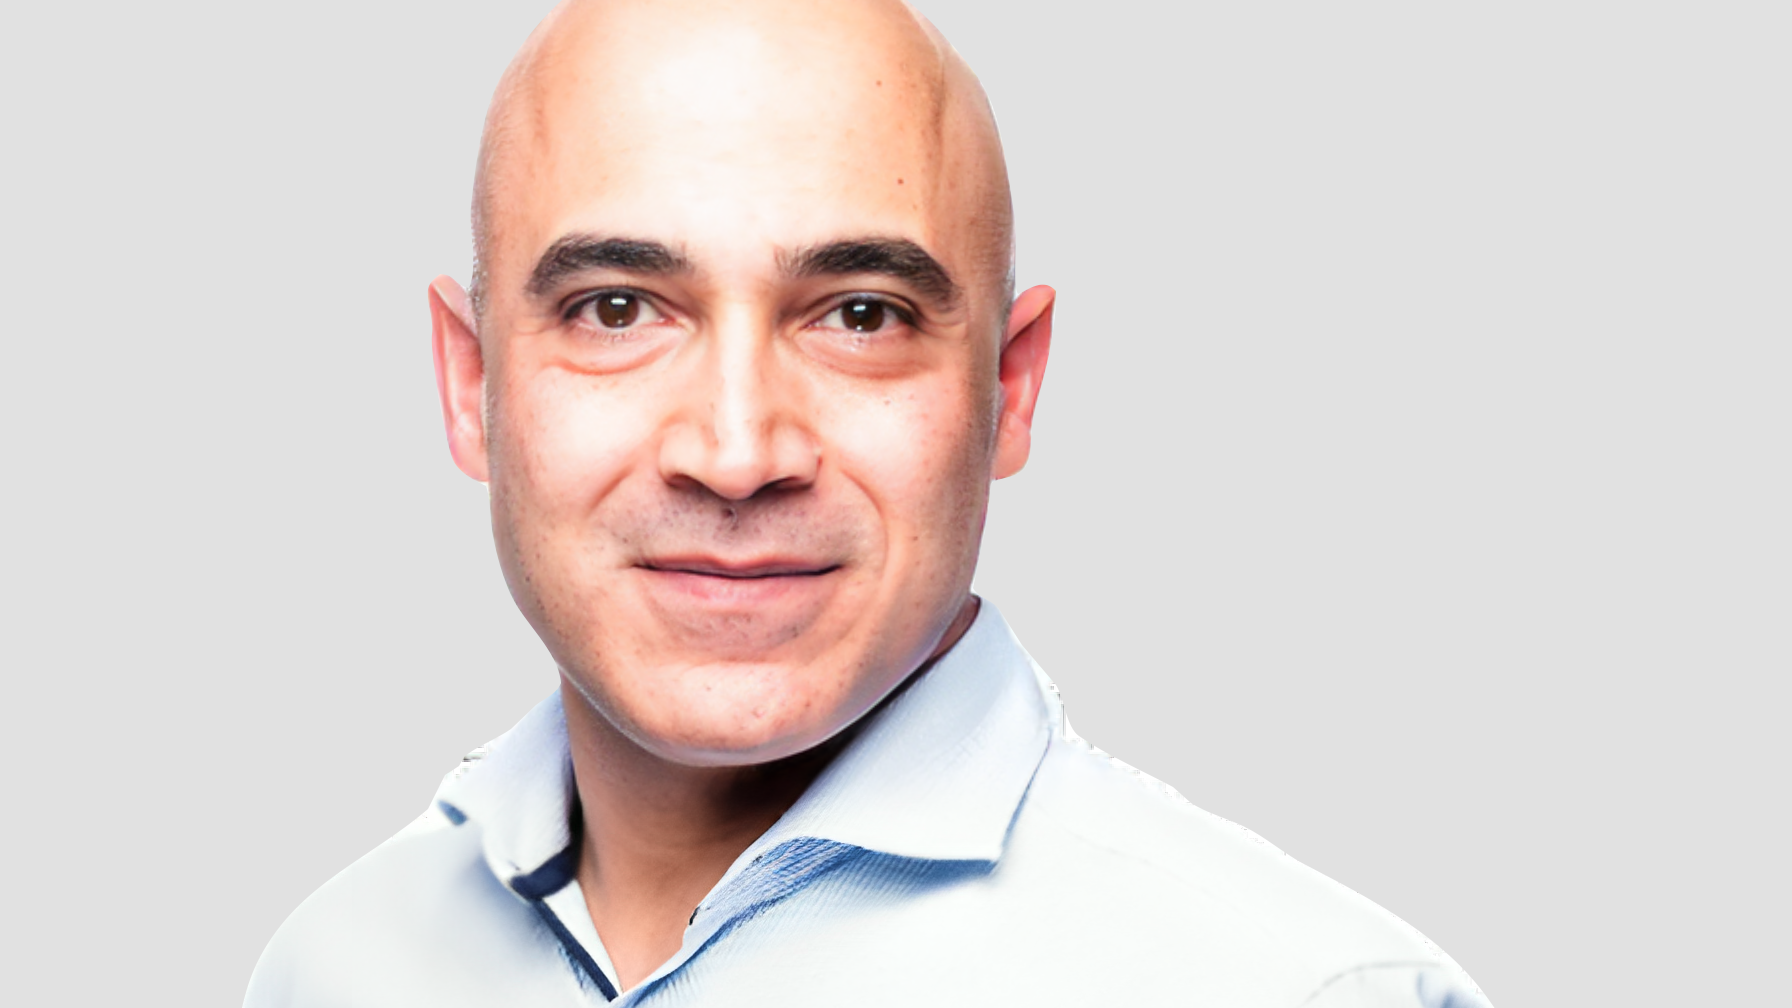 https://adgully.me/post/5370/ziad-soukkarie-joins-omd-as-saudi-arabia-md